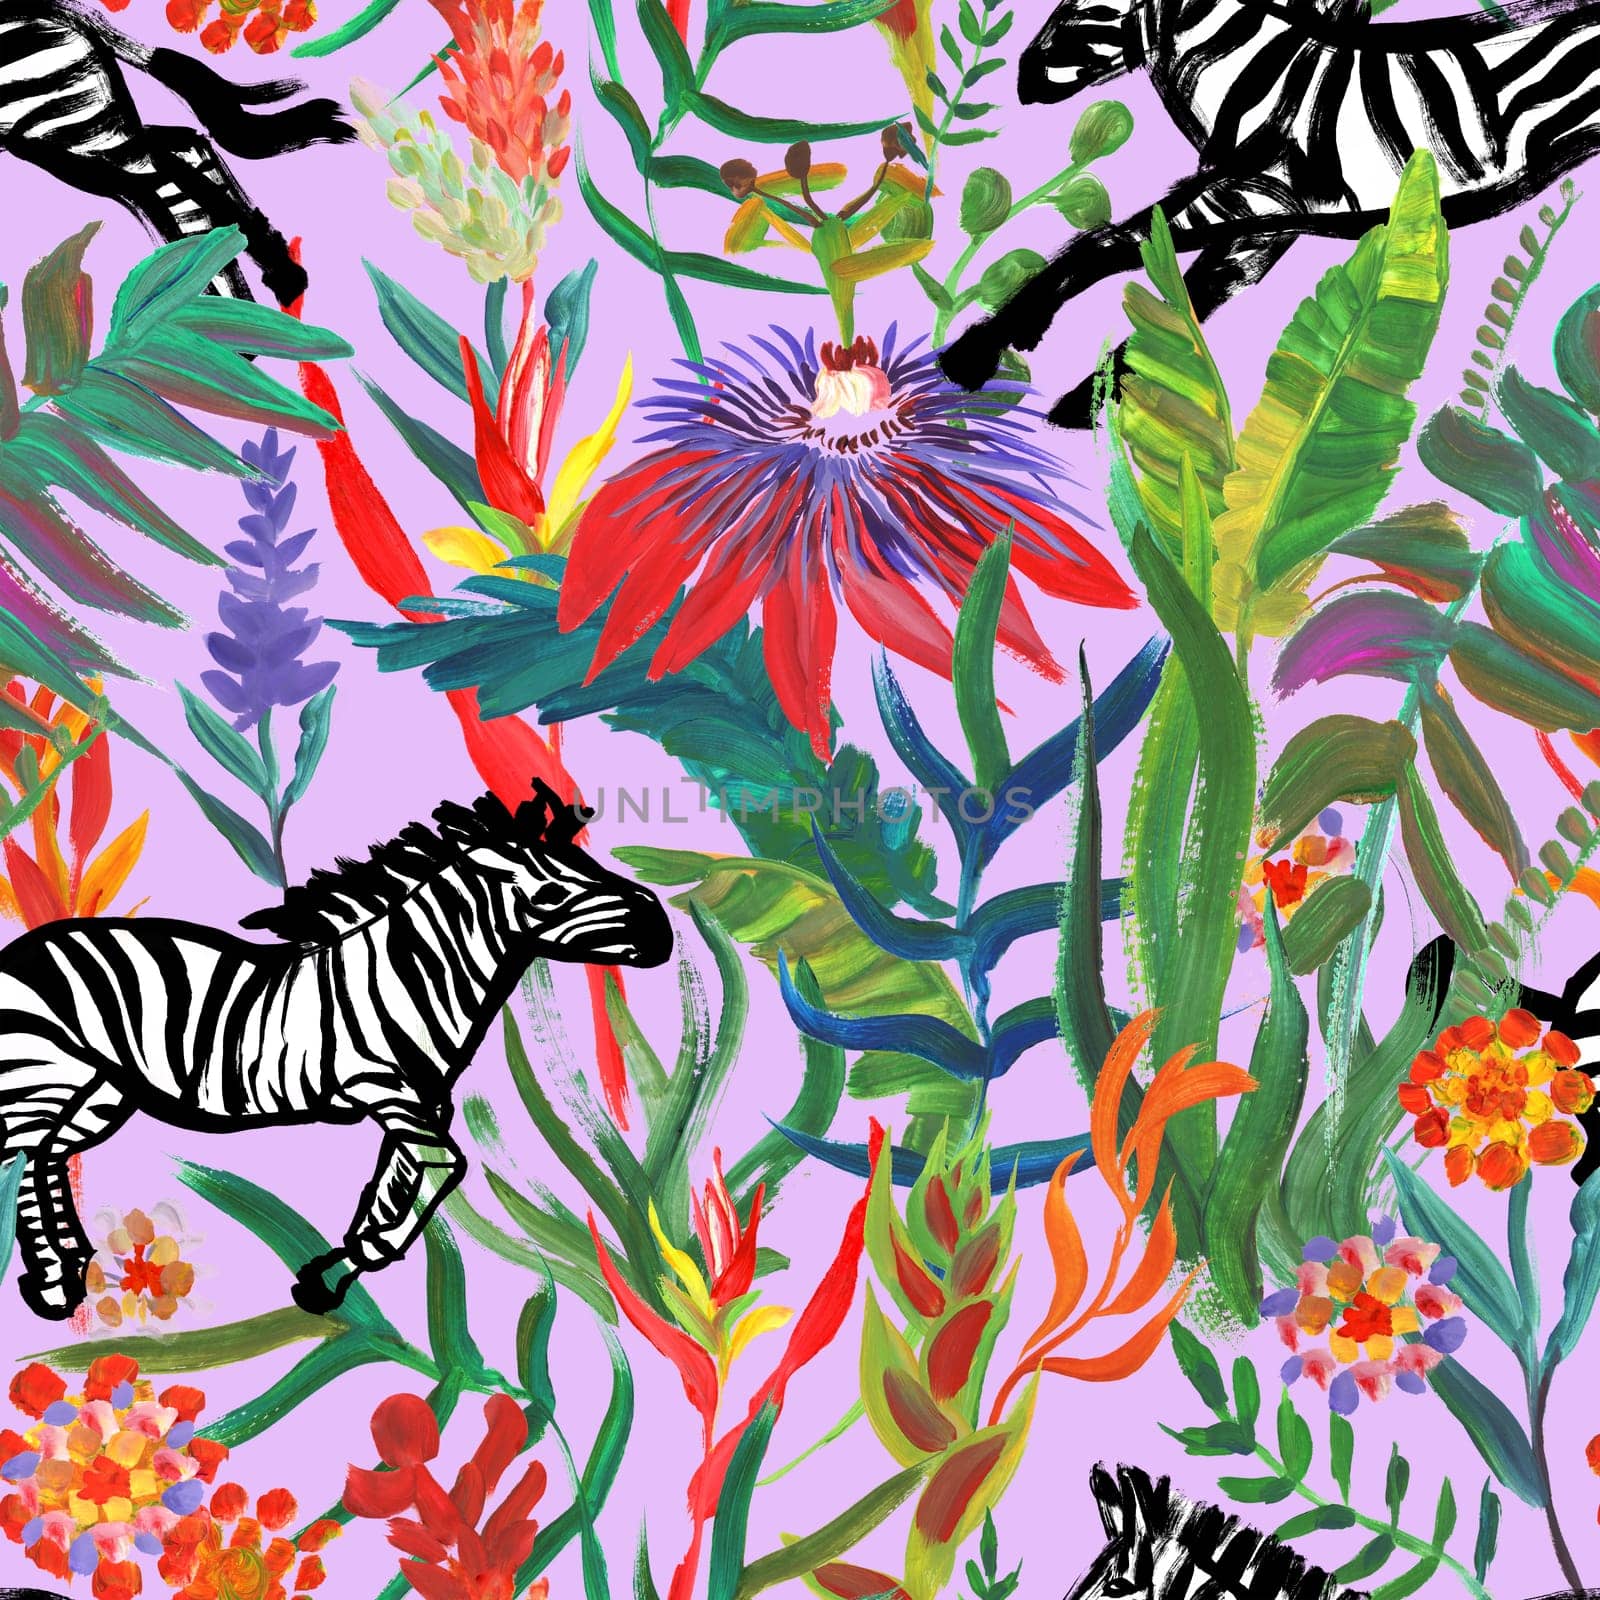 Seamless pattern with running zebras and bright tropical flowers drawn in a painterly style for summer textiles by MarinaVoyush